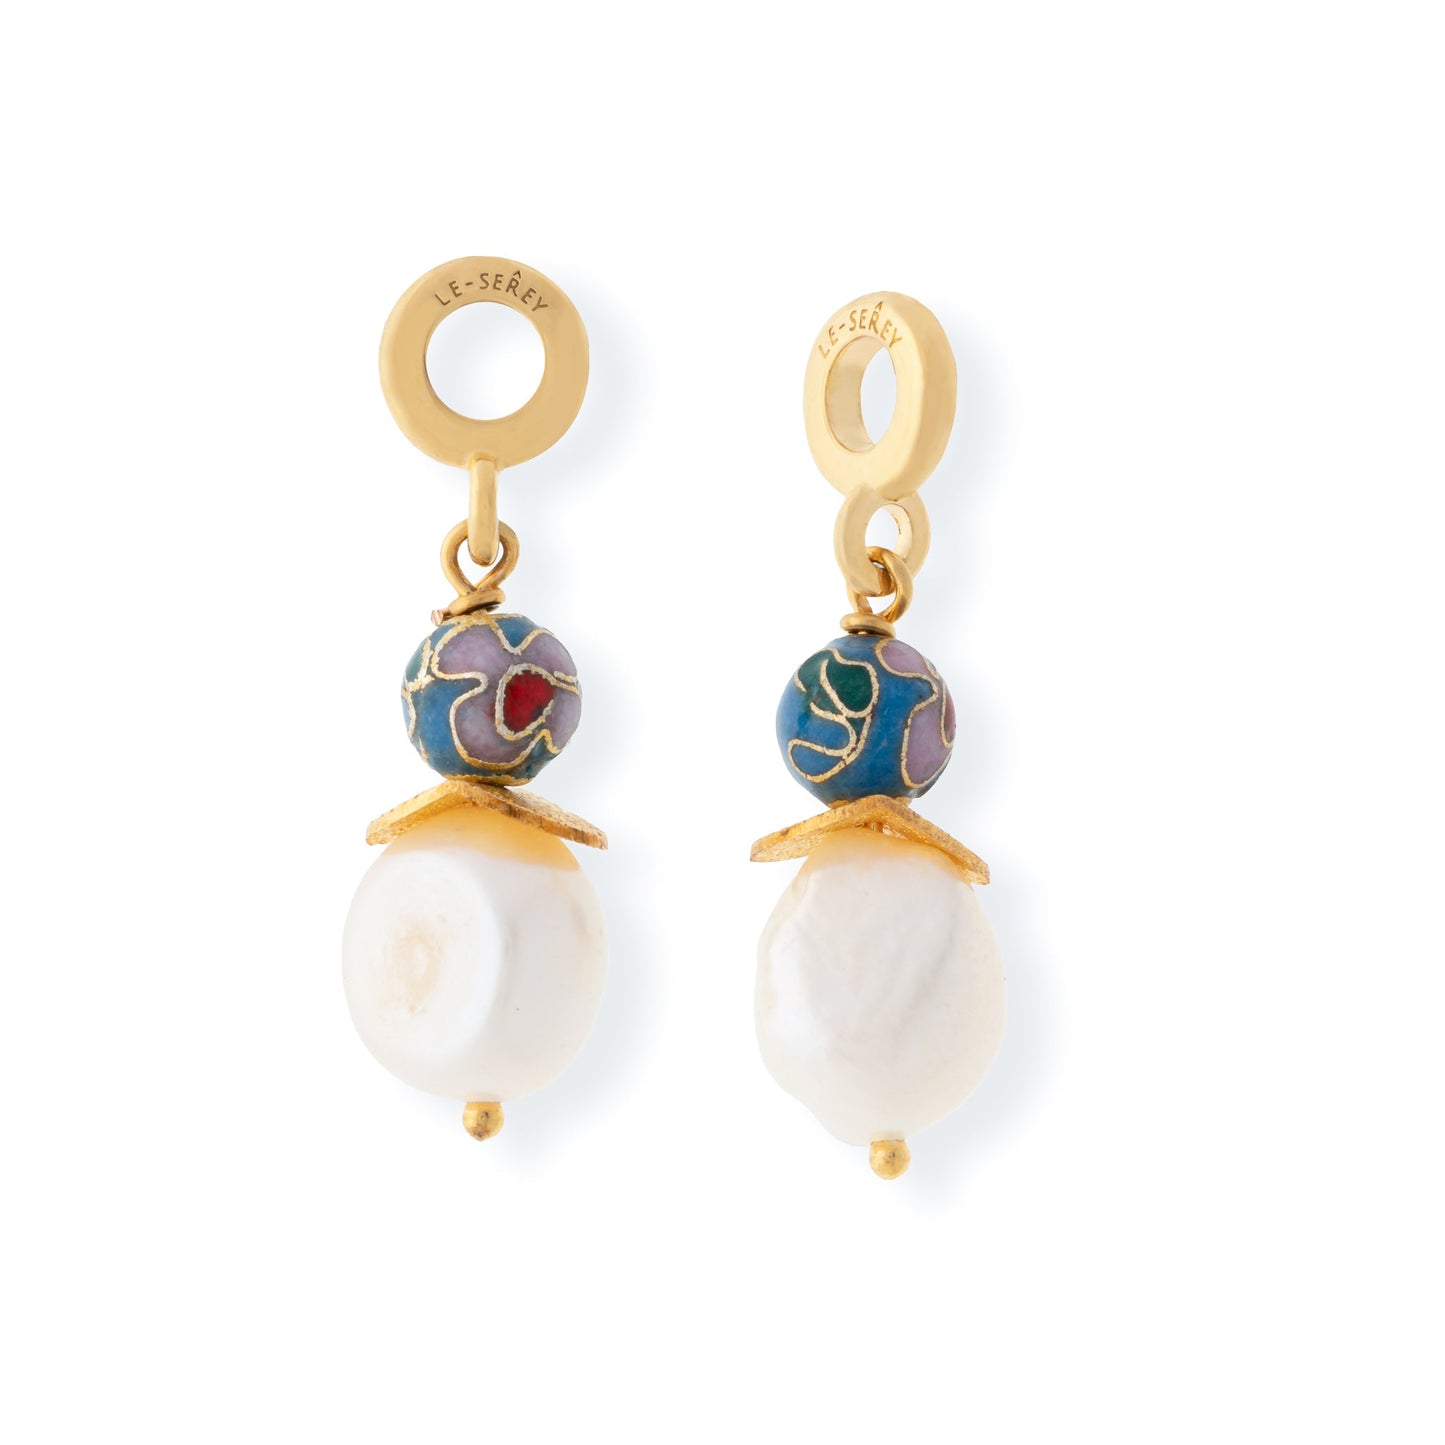 Elevate Your Style with Le Serey's Hoop Earring Charms - Le Serey